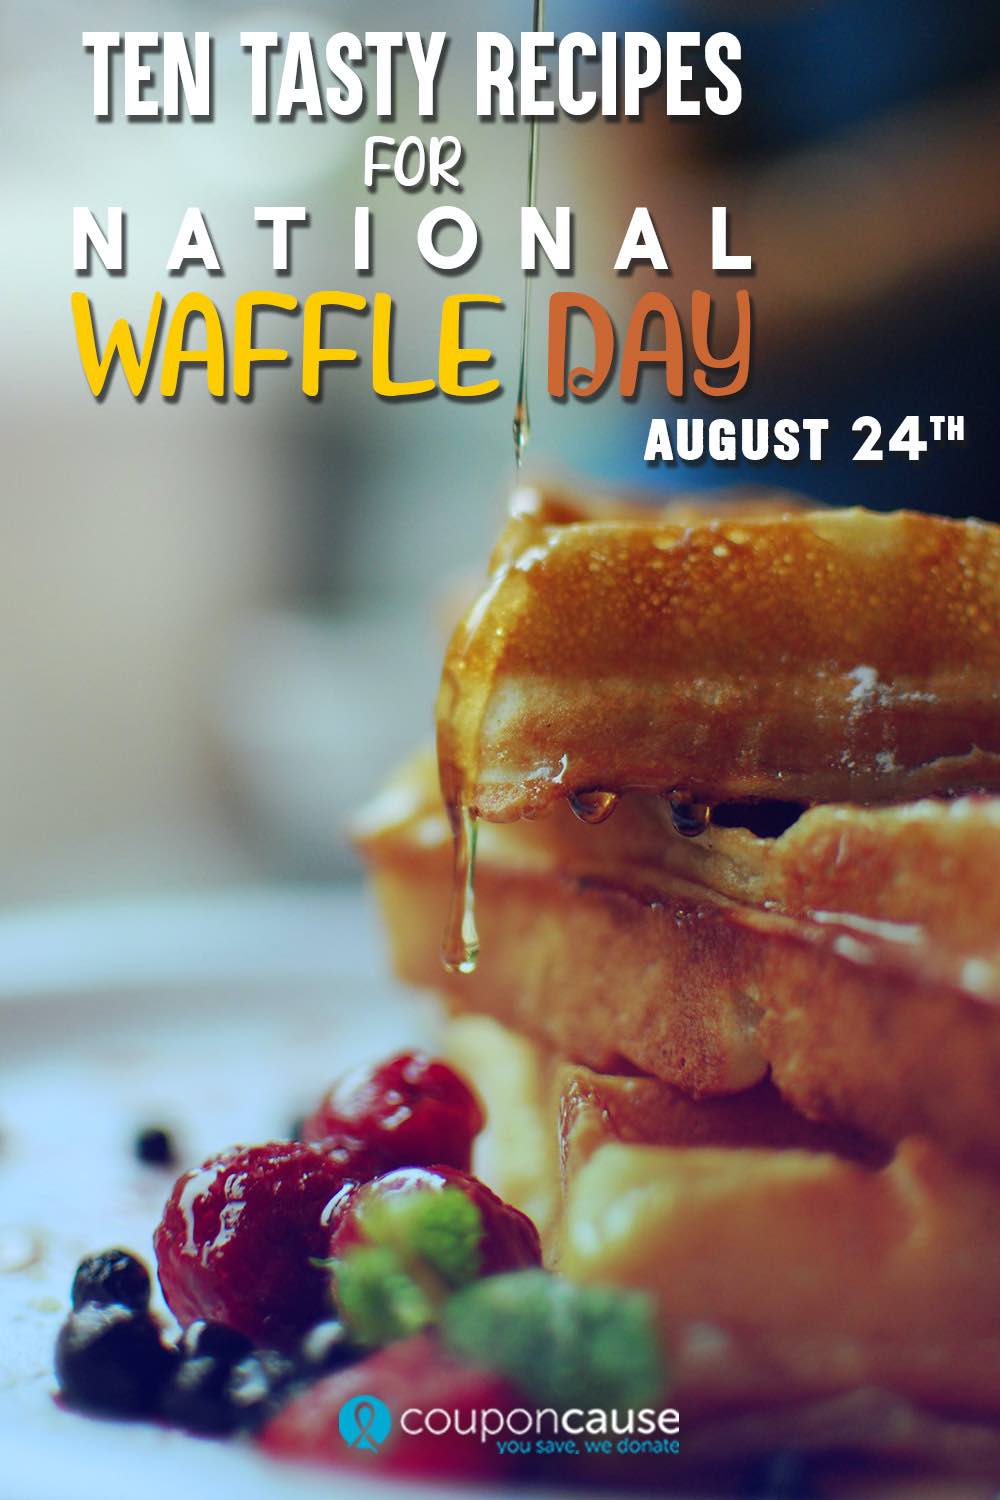 DIY Waffle Recipes for National Waffle Day August 24